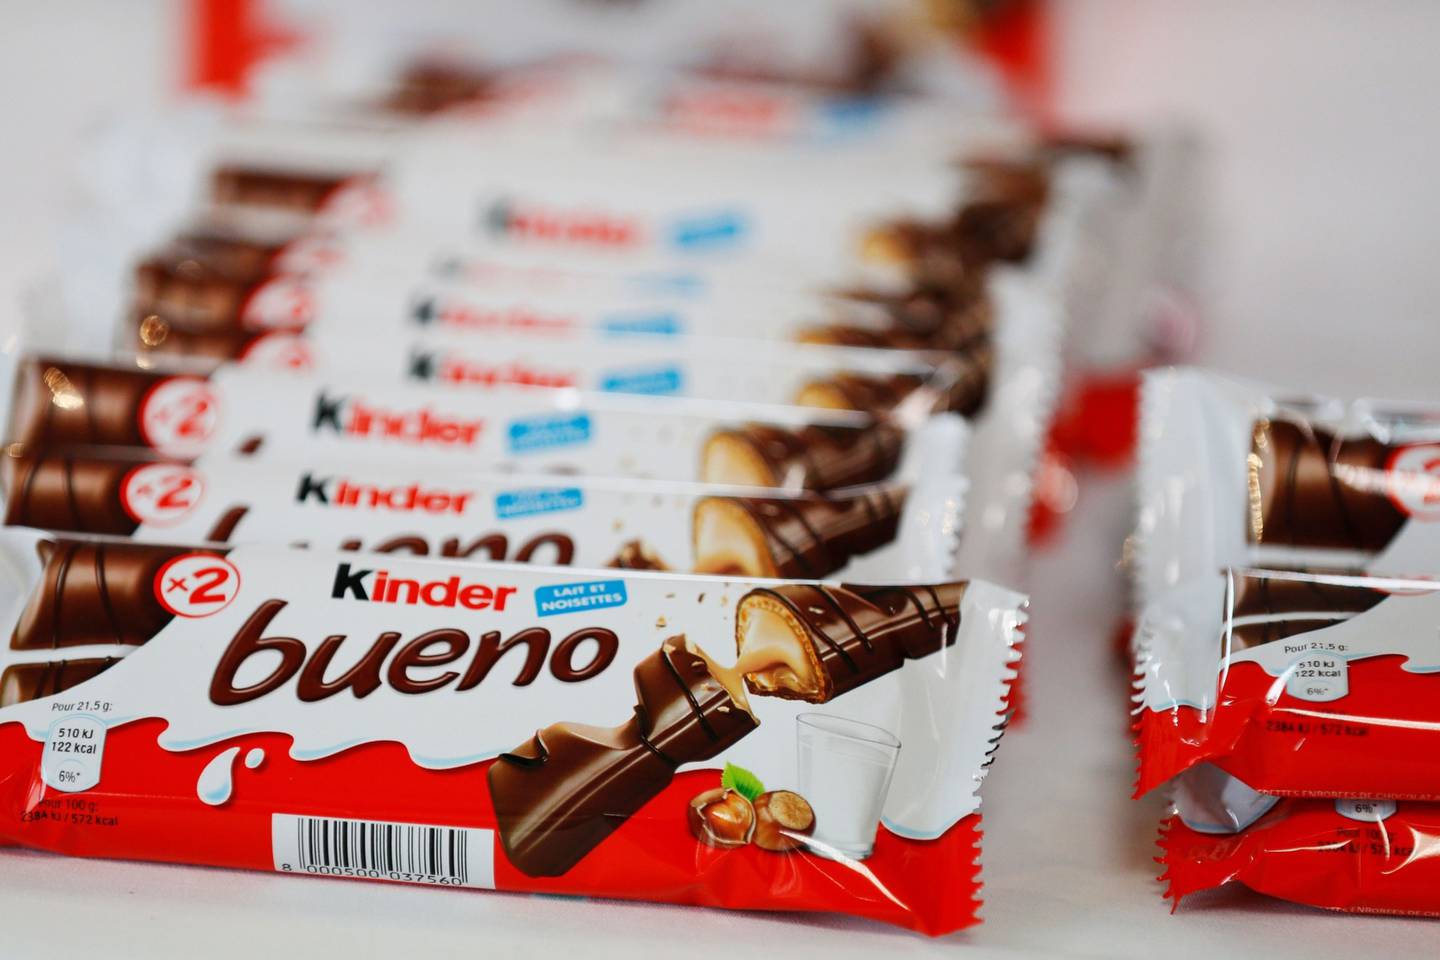 Kinder Bueno Fotógrafo: Charly Triballeau/AFP/Getty Images